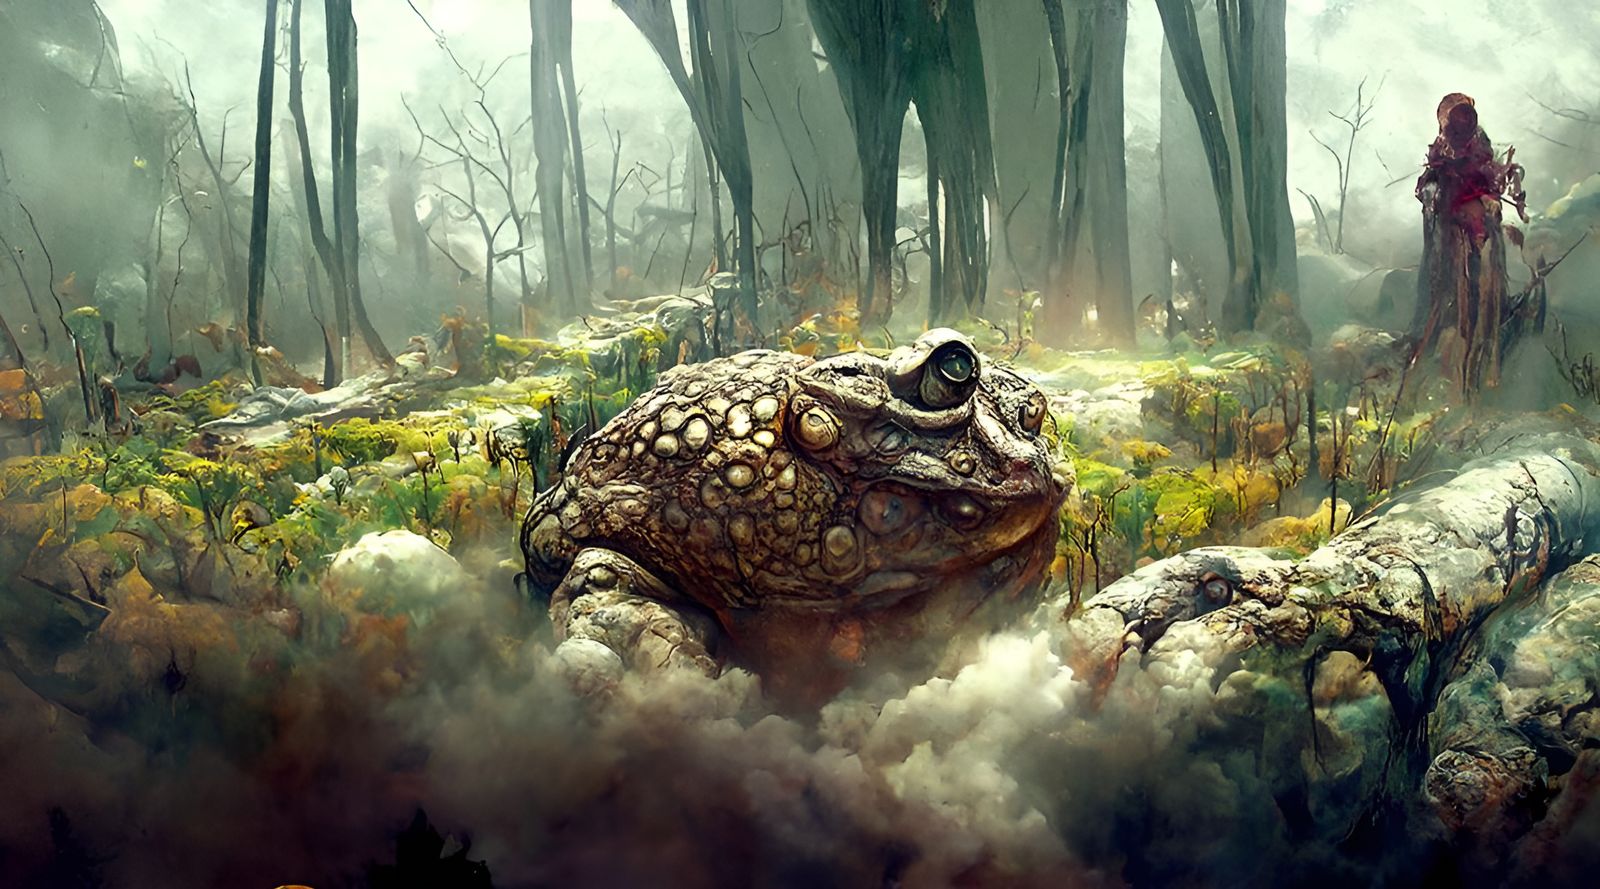 giant toad fantasy